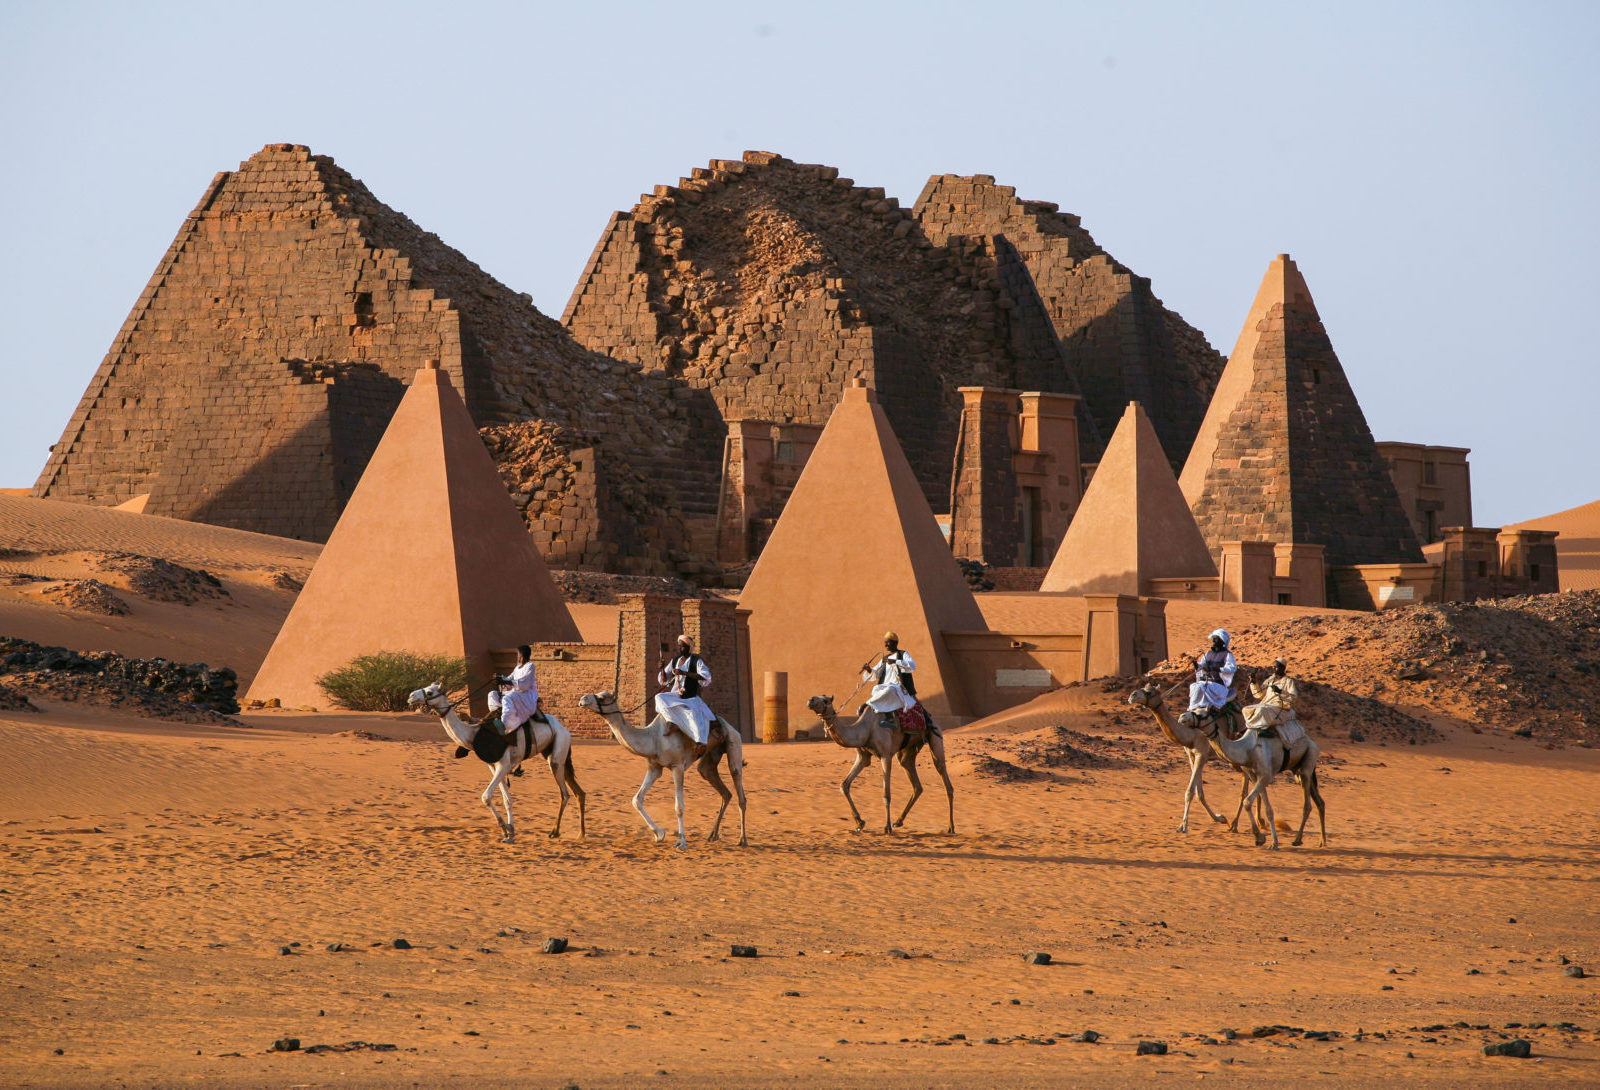 The Hardest Trivia Quiz You’ll Ever Take (Unless You Take the Easy Way Out) Pyramids of Meroe, Nubian pyramids, Sudan